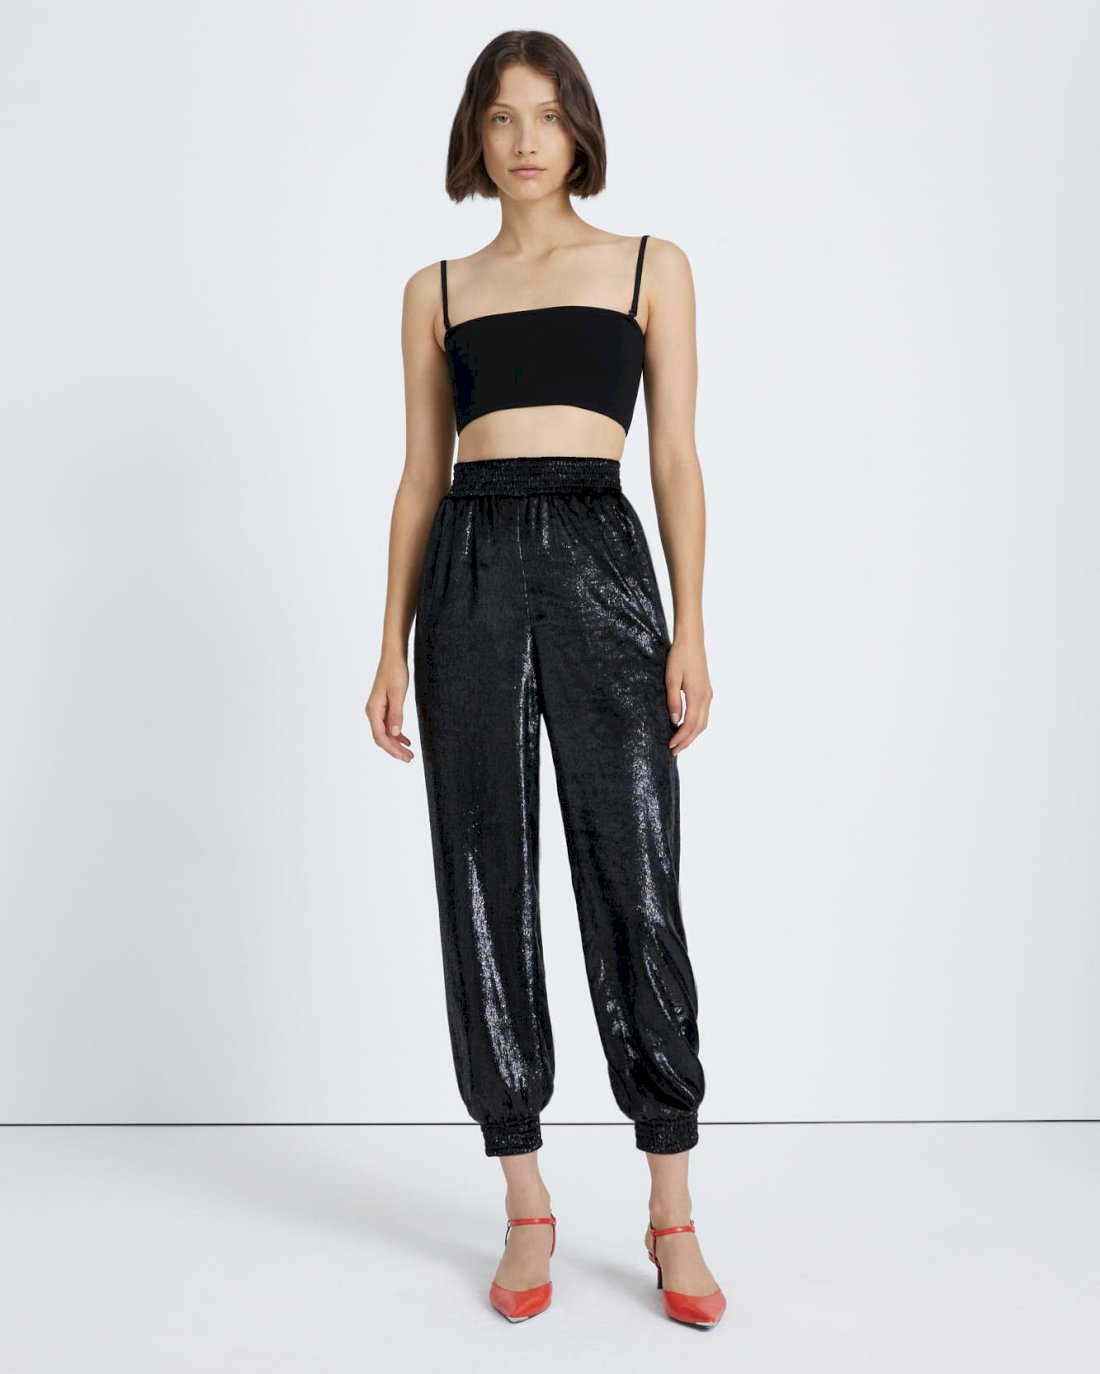 Luxe Jogger in Black Shine | 7 For All Mankind